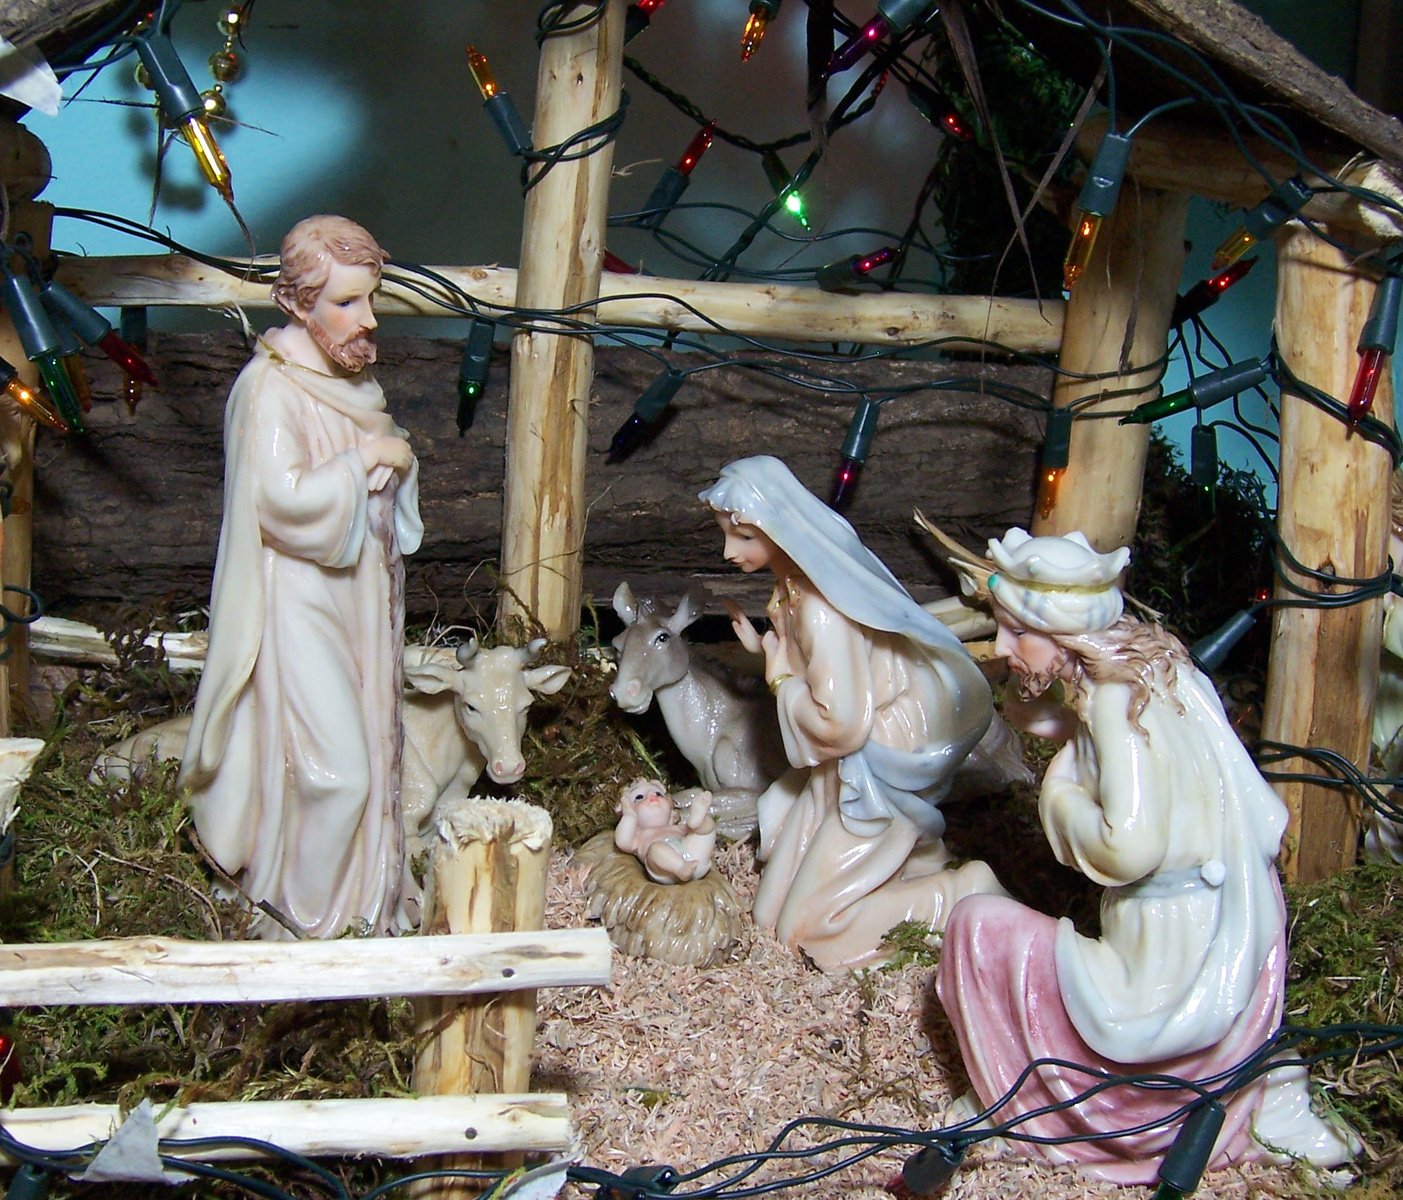 nativity scene of the birth of jesus and the baby mary